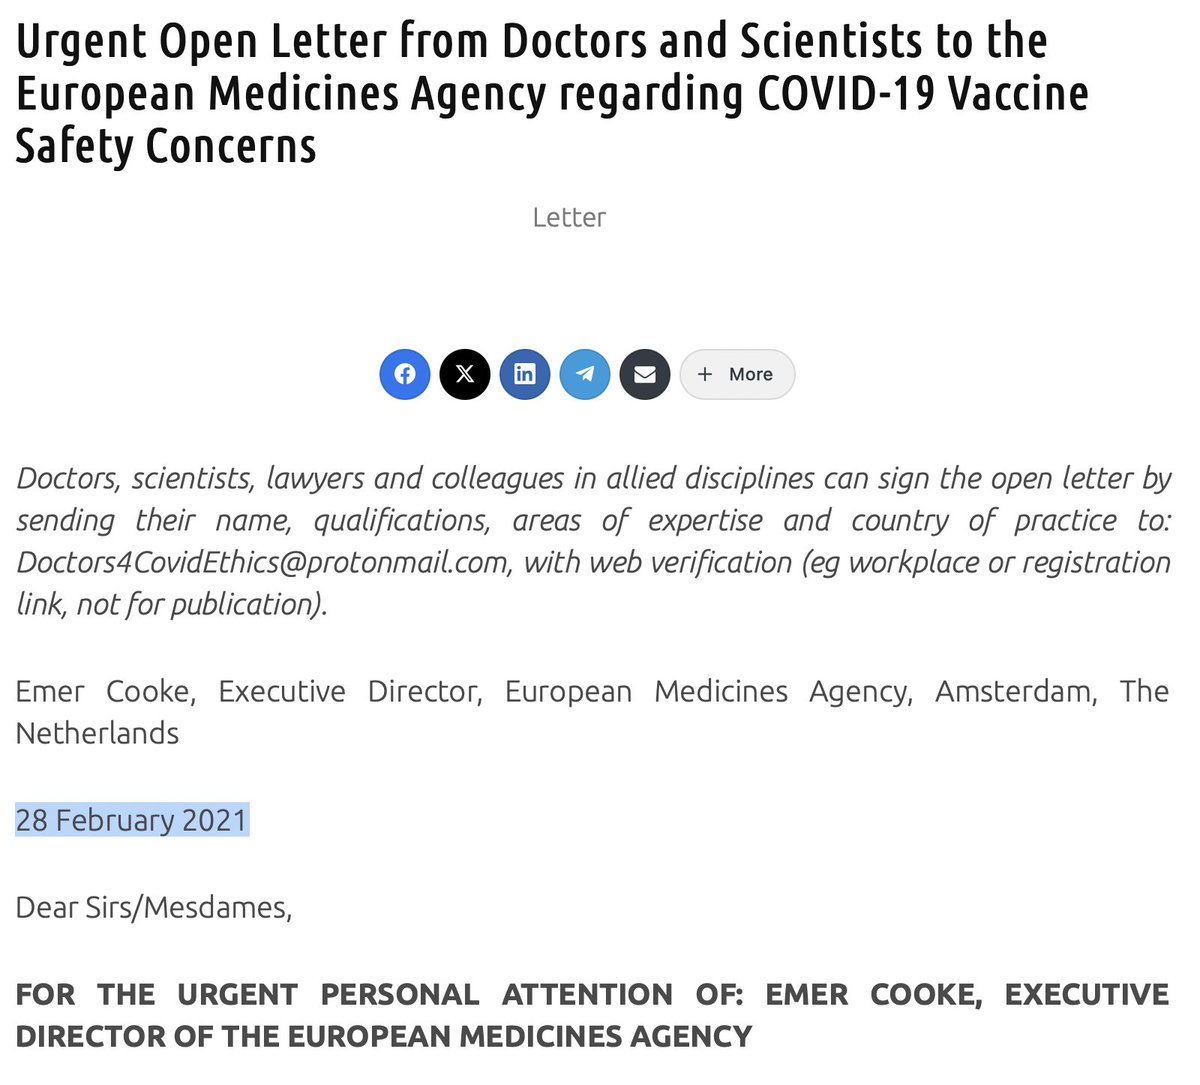 Do not fall for this new, scripted re-writing of history regarding C19 jabs In Feb 2021, several drs & scientists wrote to EMA warning about the risks of blood clots, strokes, autoimmune disease & more in an effort to stop the harm! The EMA did nothing! doctors4covidethics.org/urgent-open-le…